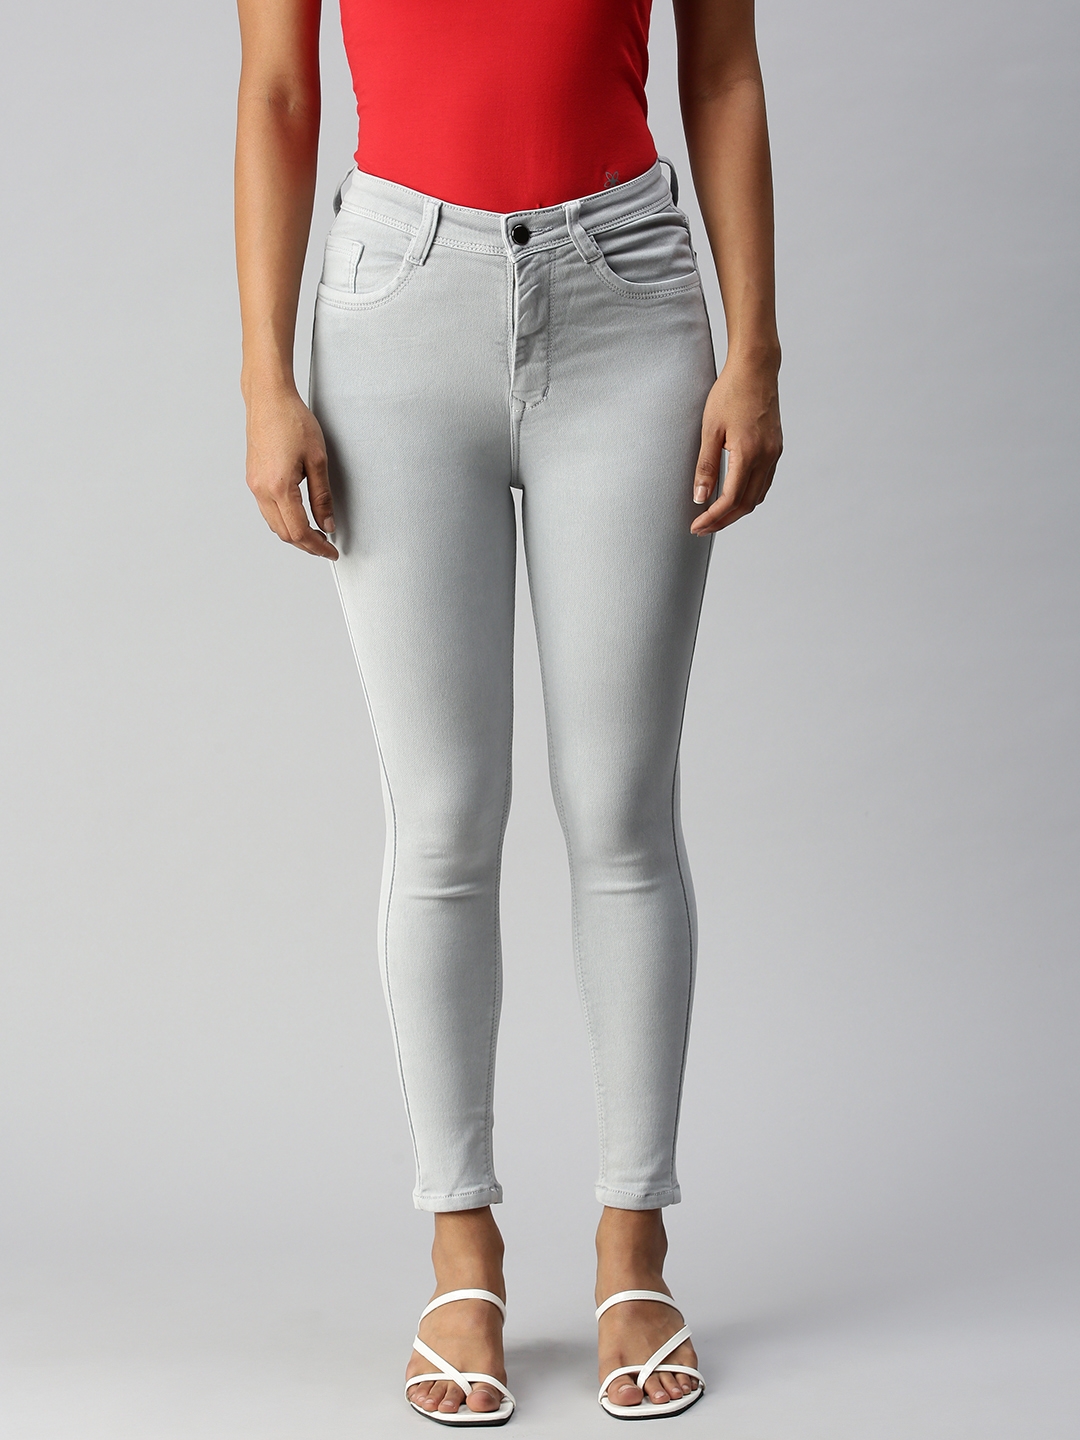 Showoff | SHOWOFF Women's Super Skinny Fit Clean Look Grey Jeans 0